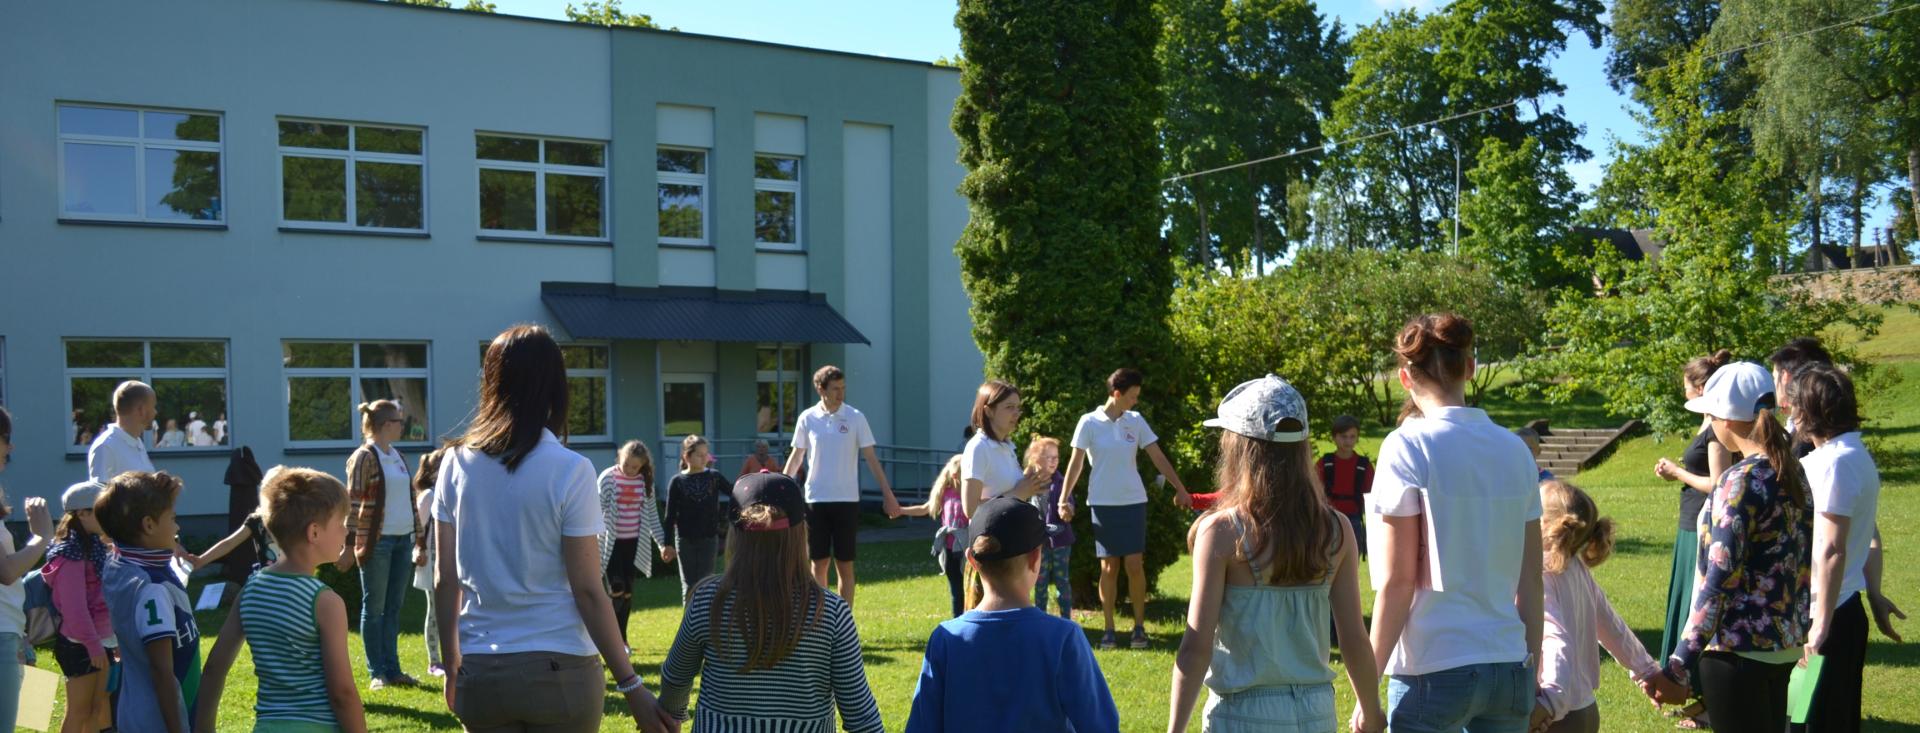 Educators and students are standing side-by-side in a giant circle holding hands. They are outside on a sunny day in green grass. There is a building with many windows on the left and trees on the right in the background. The people are all wearing summer clothes with a few wearing caps.